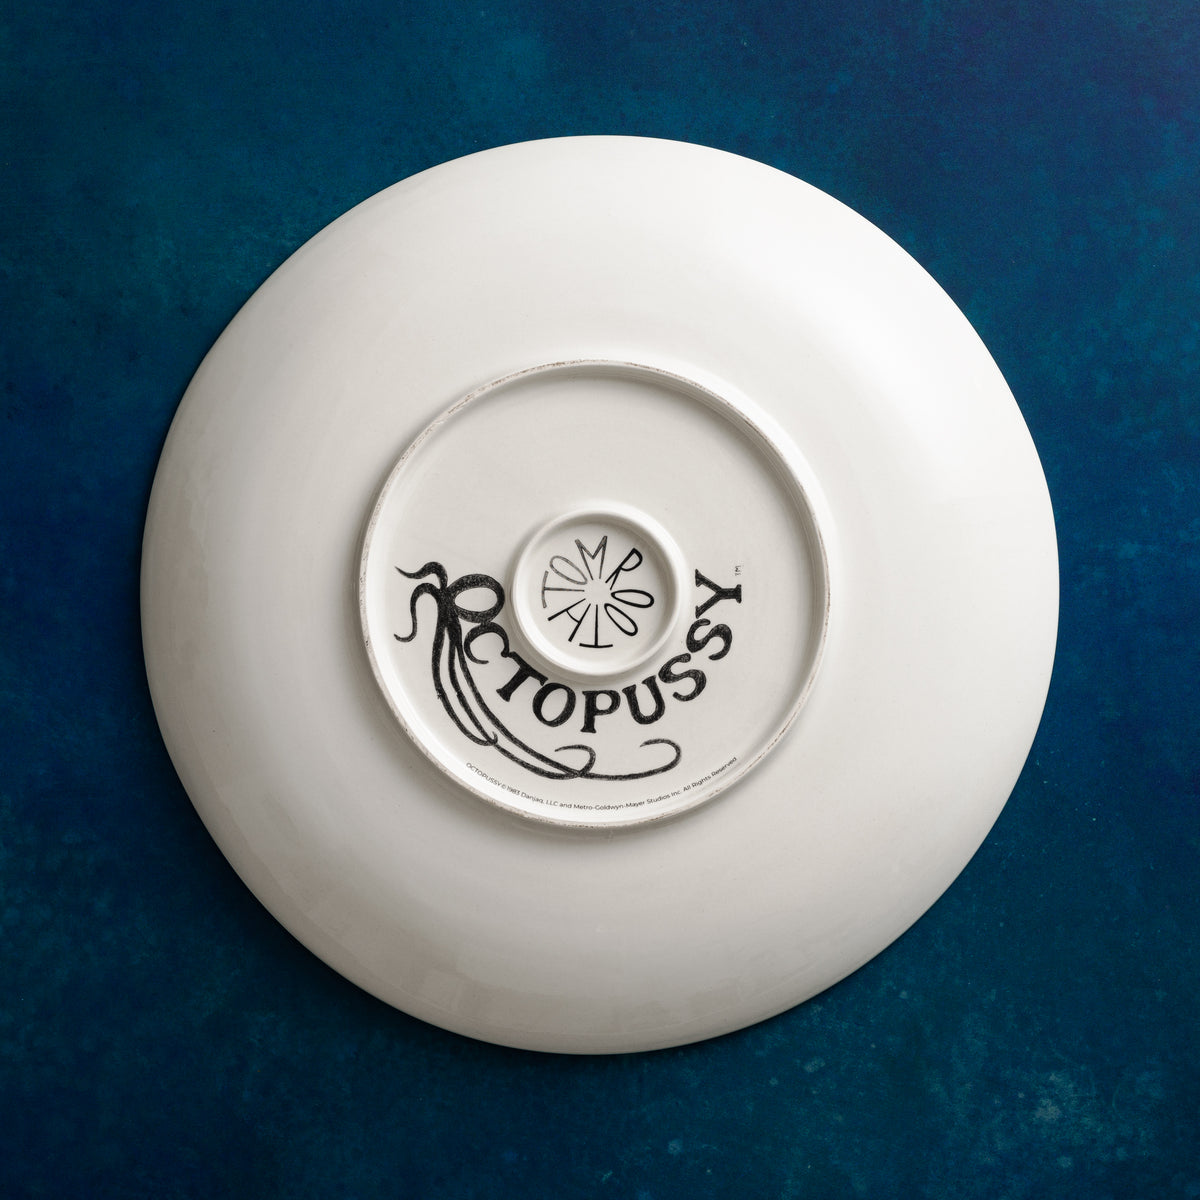 James Bond Octopussy Art Plate - Limited Edition - By Tom Rooth